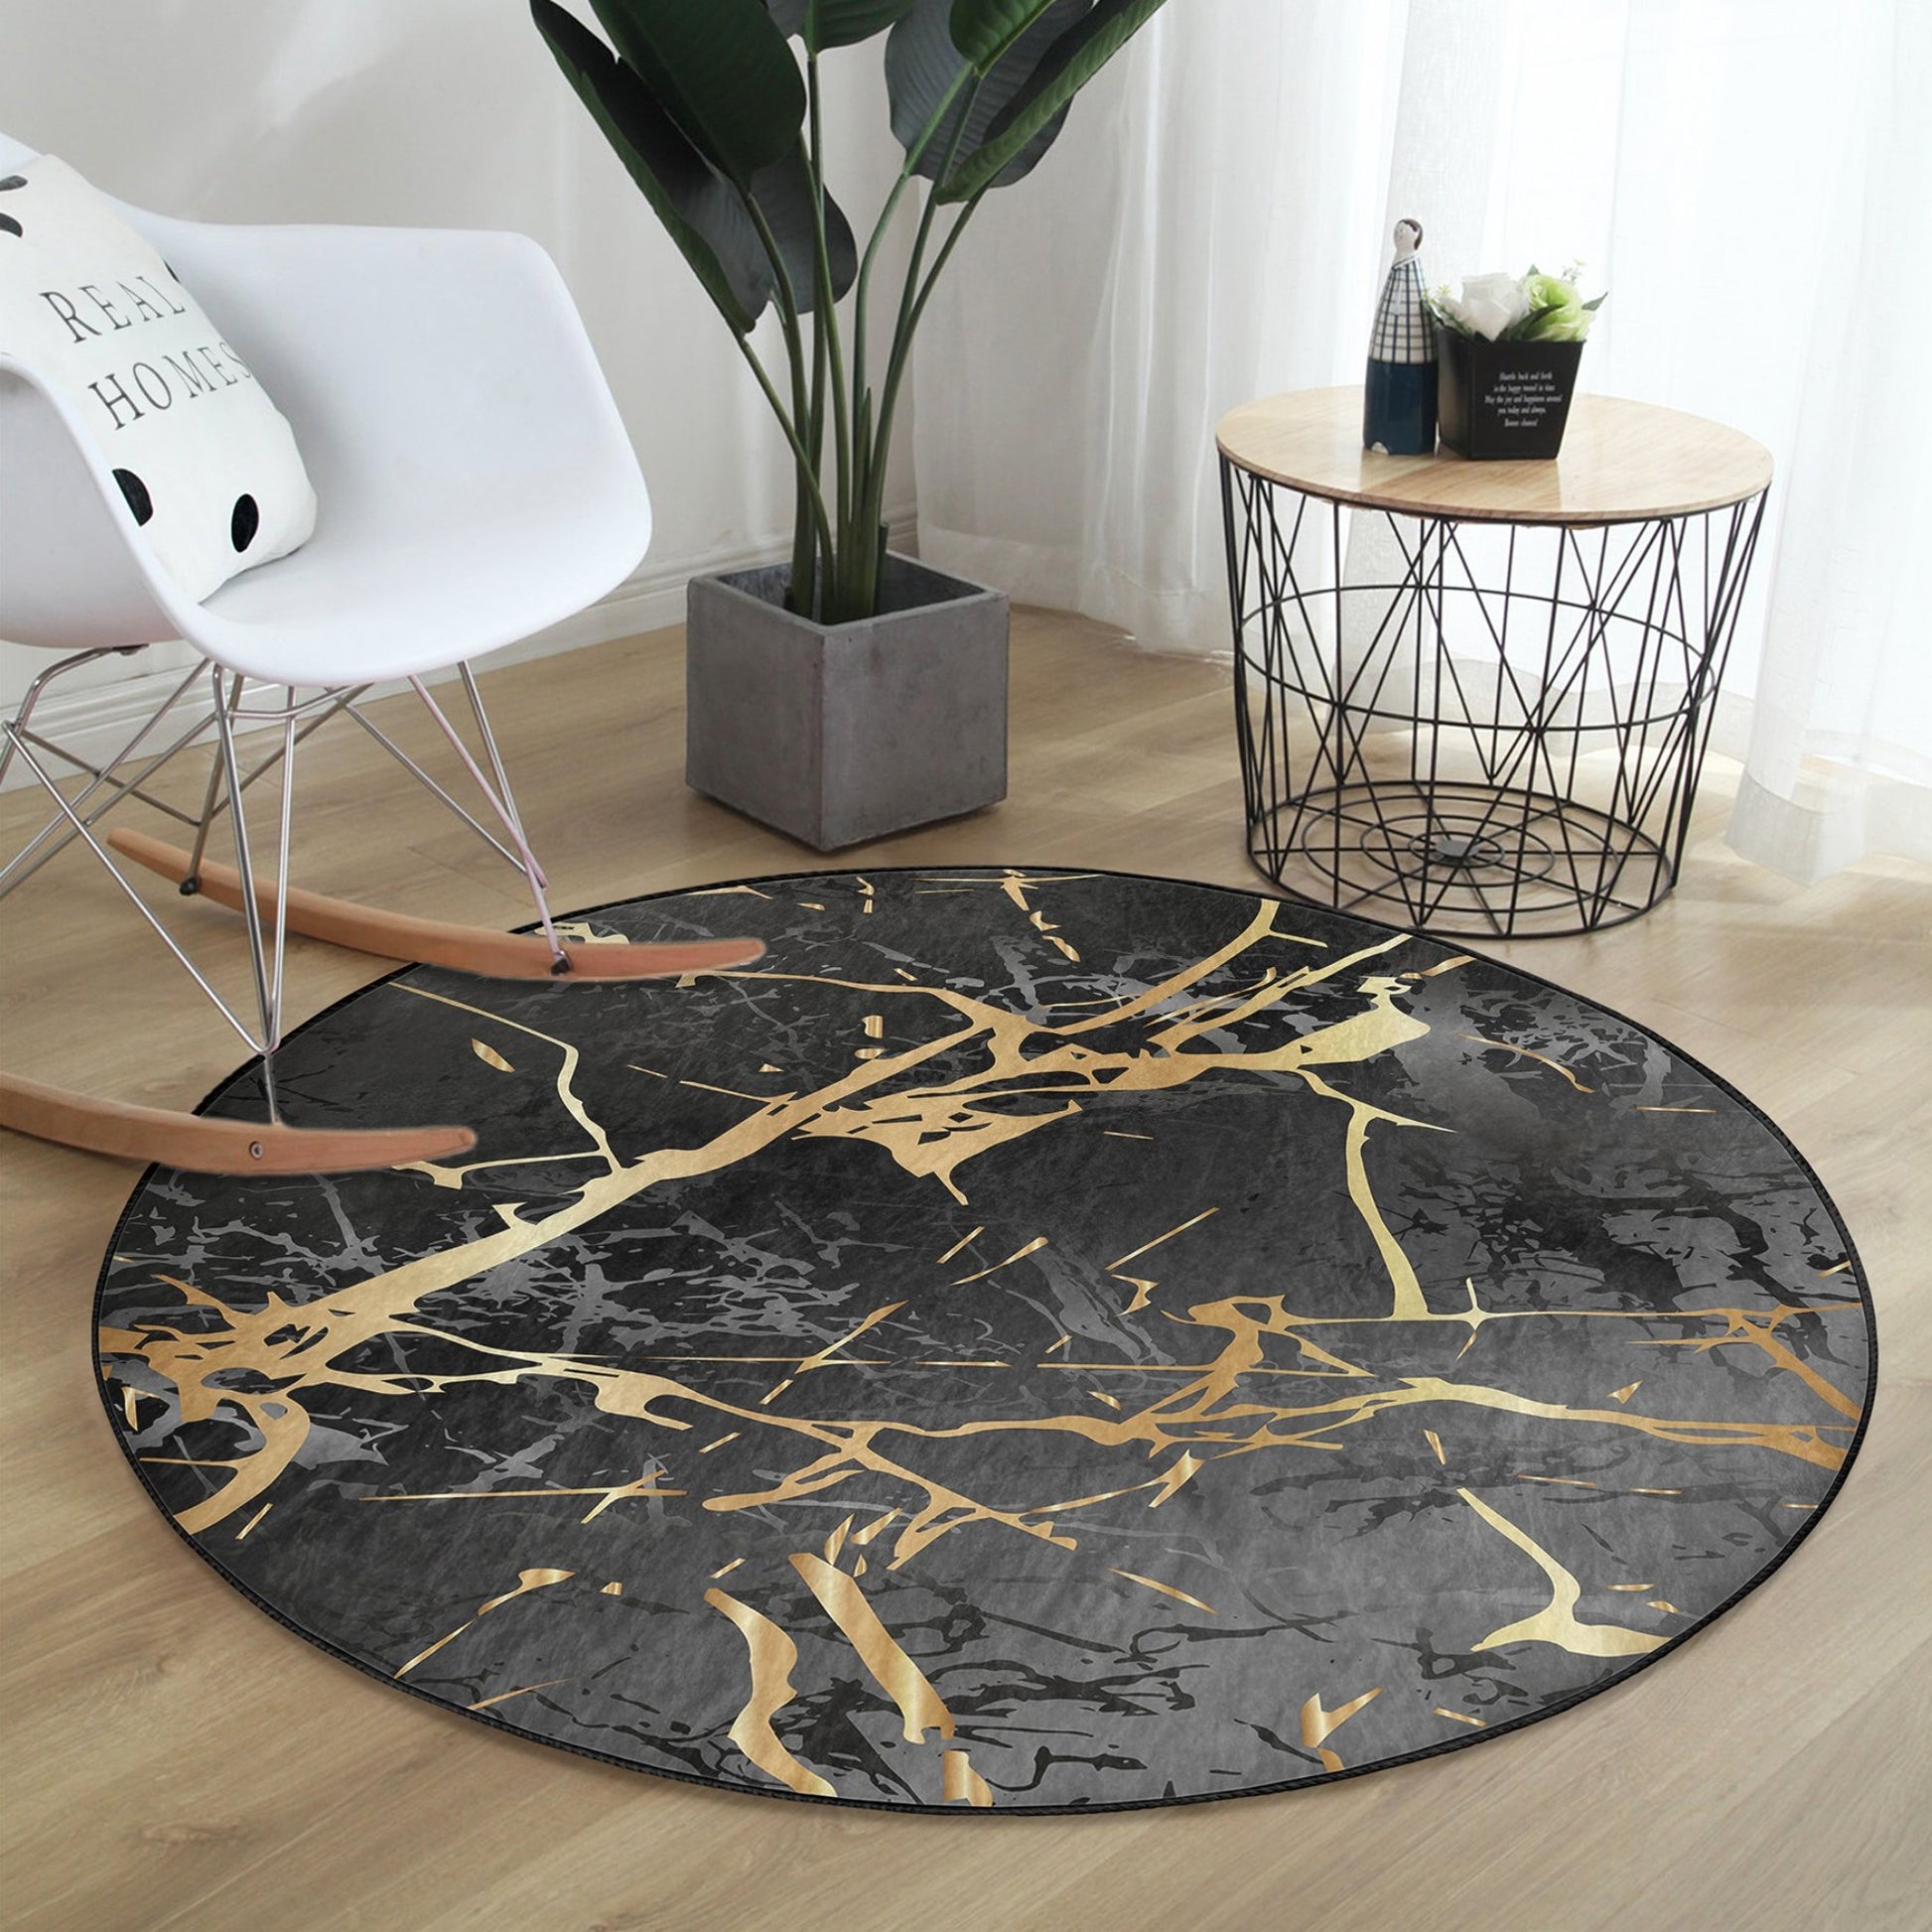 Round Patterned Floor Rug - Luxurious Accent